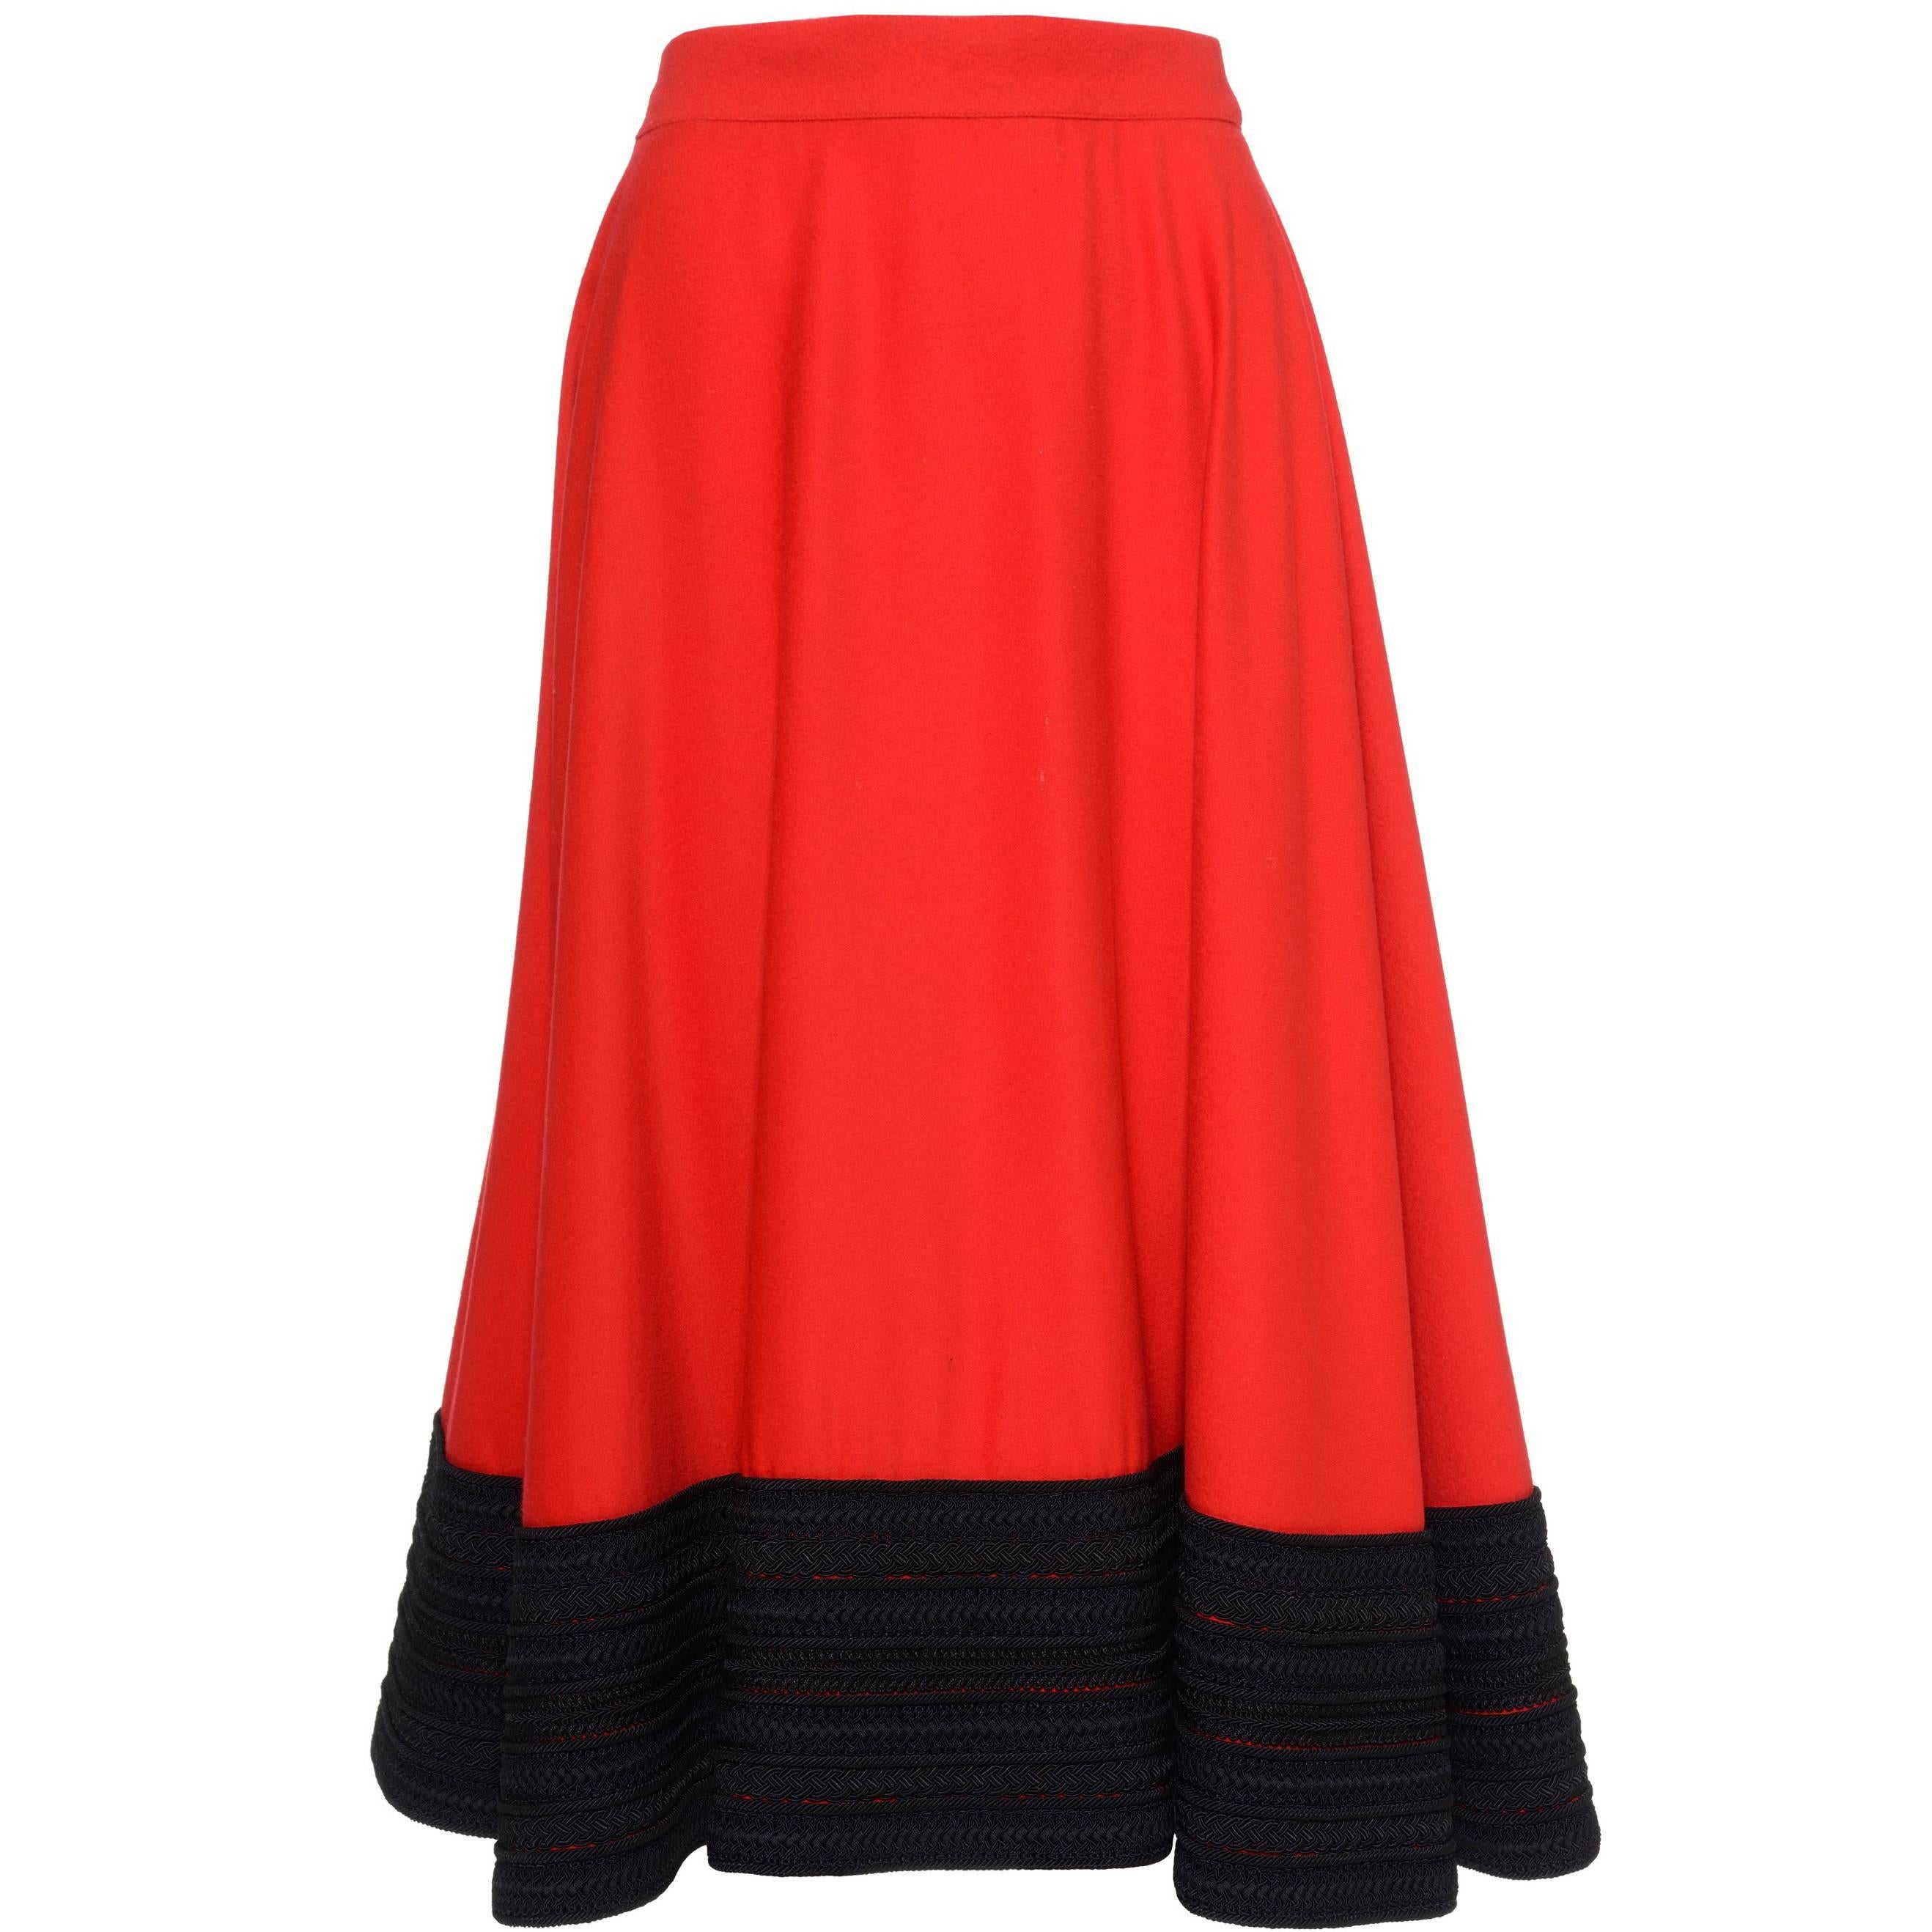 1980s GENNY Red Skirt With Black Braid Hem For Sale